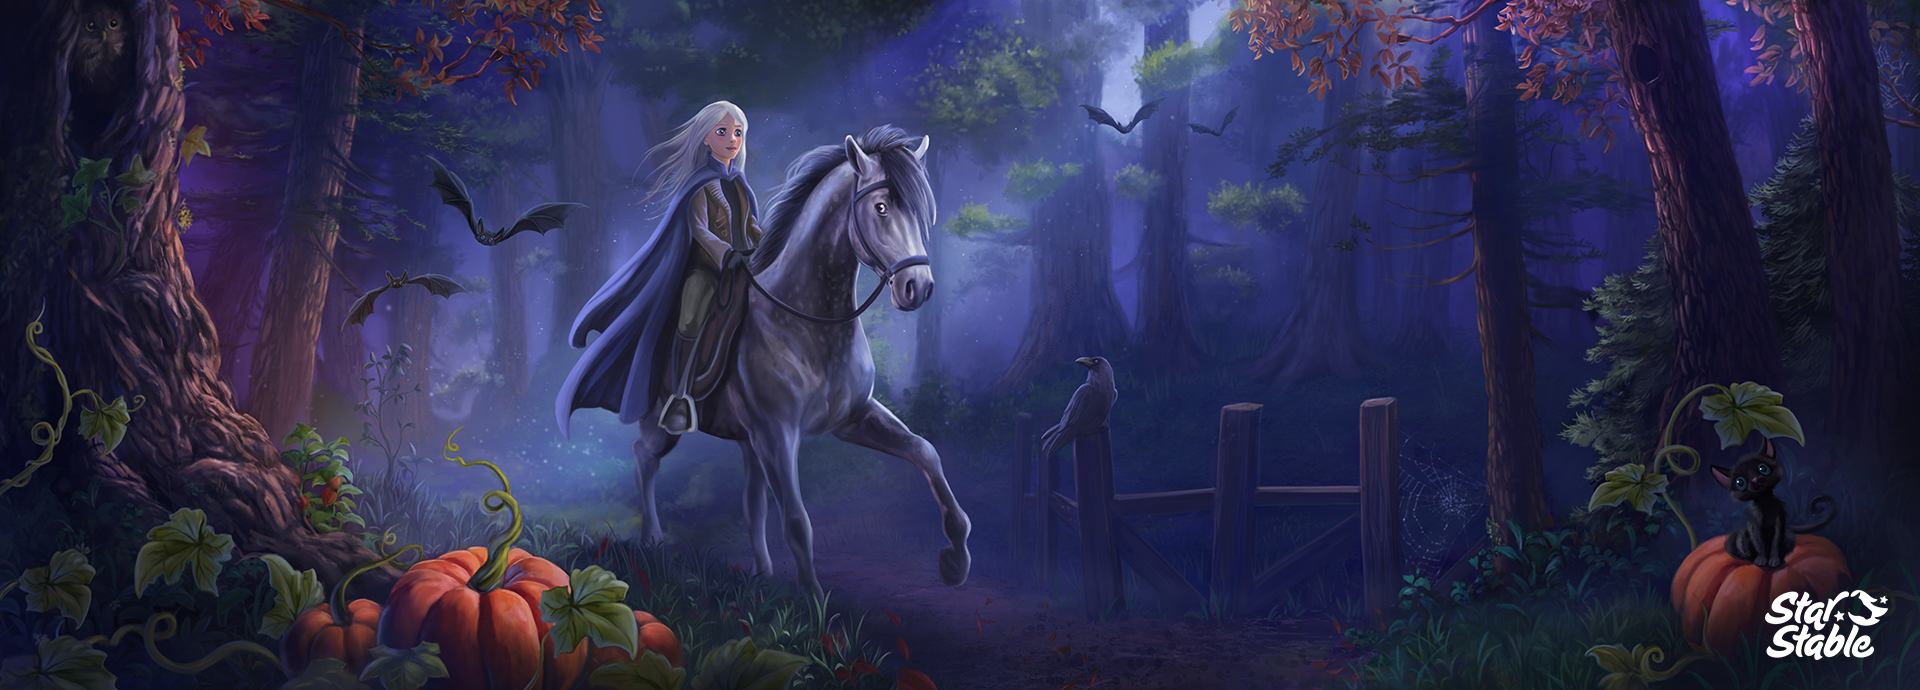 Free desktop wallpapers and backgrounds Star Stable. 